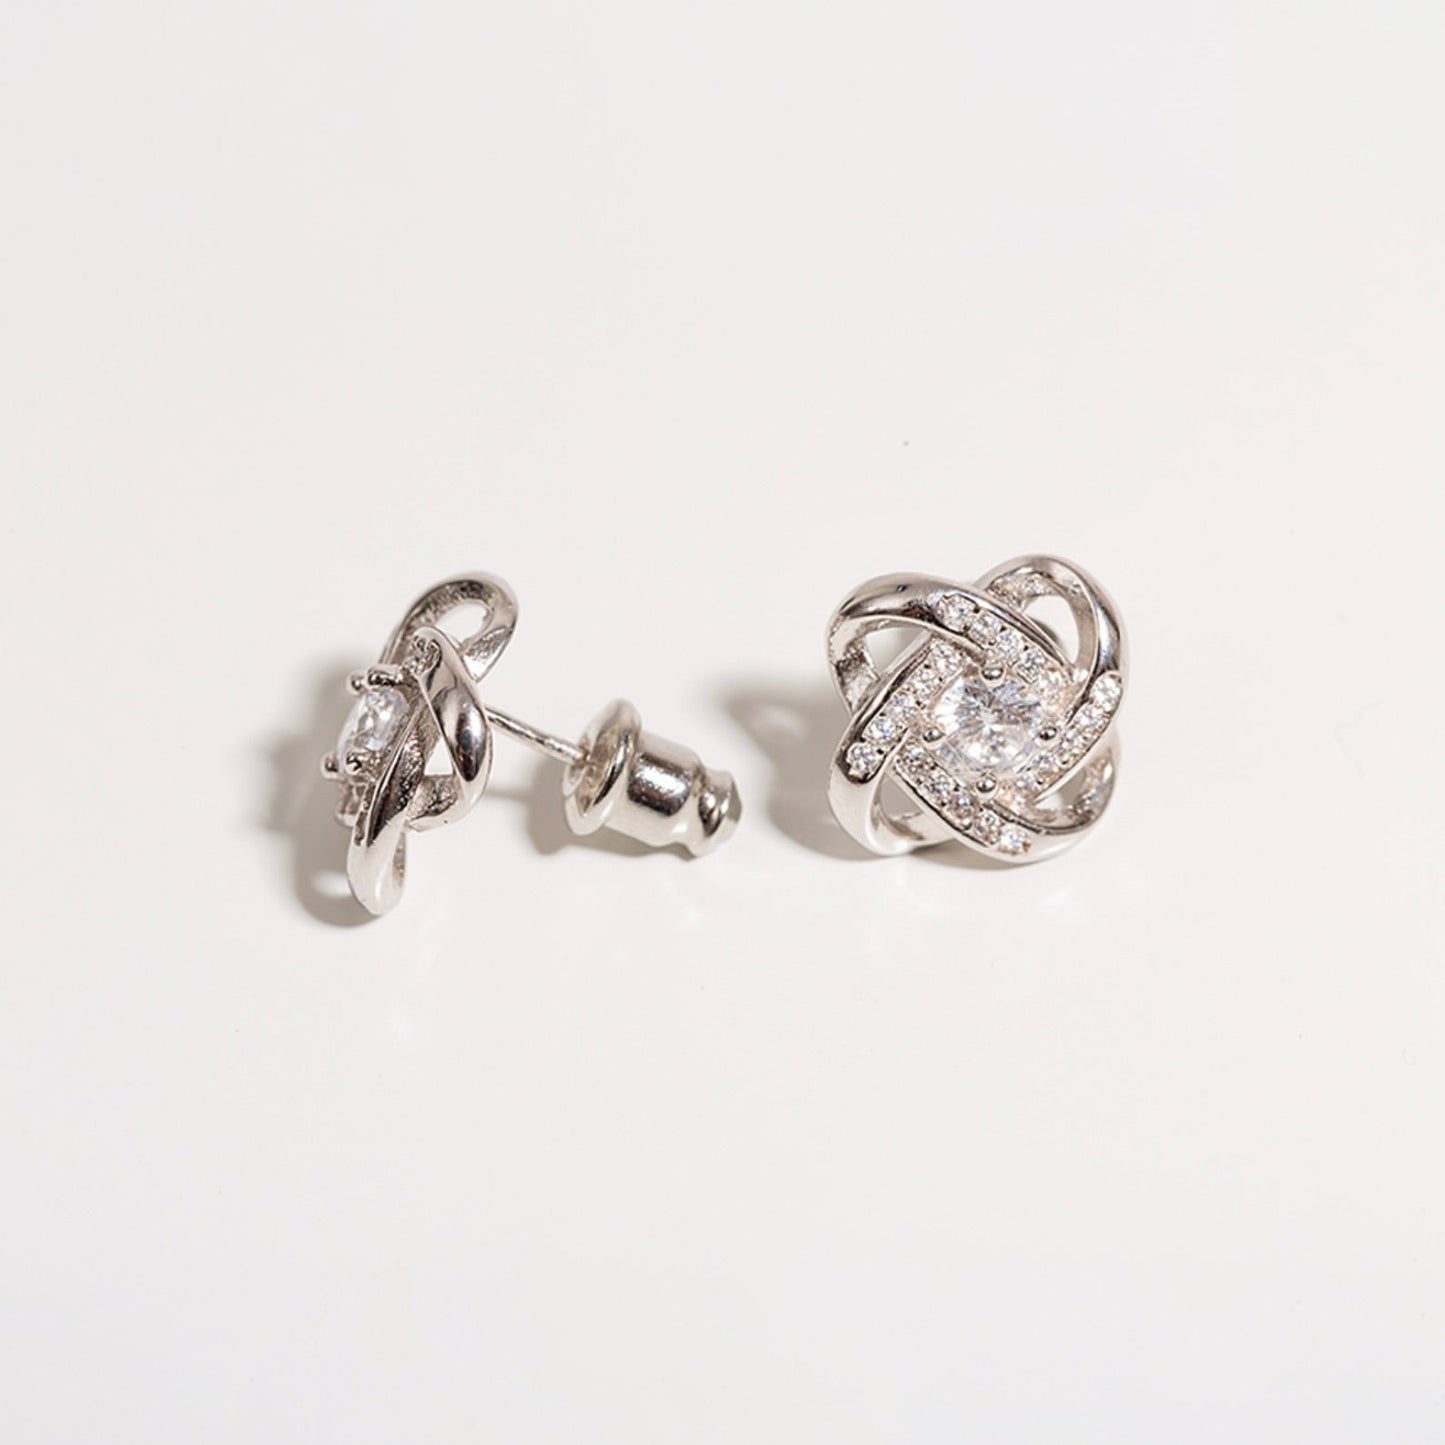 'Knotted Love' Sterling Silver Earrings